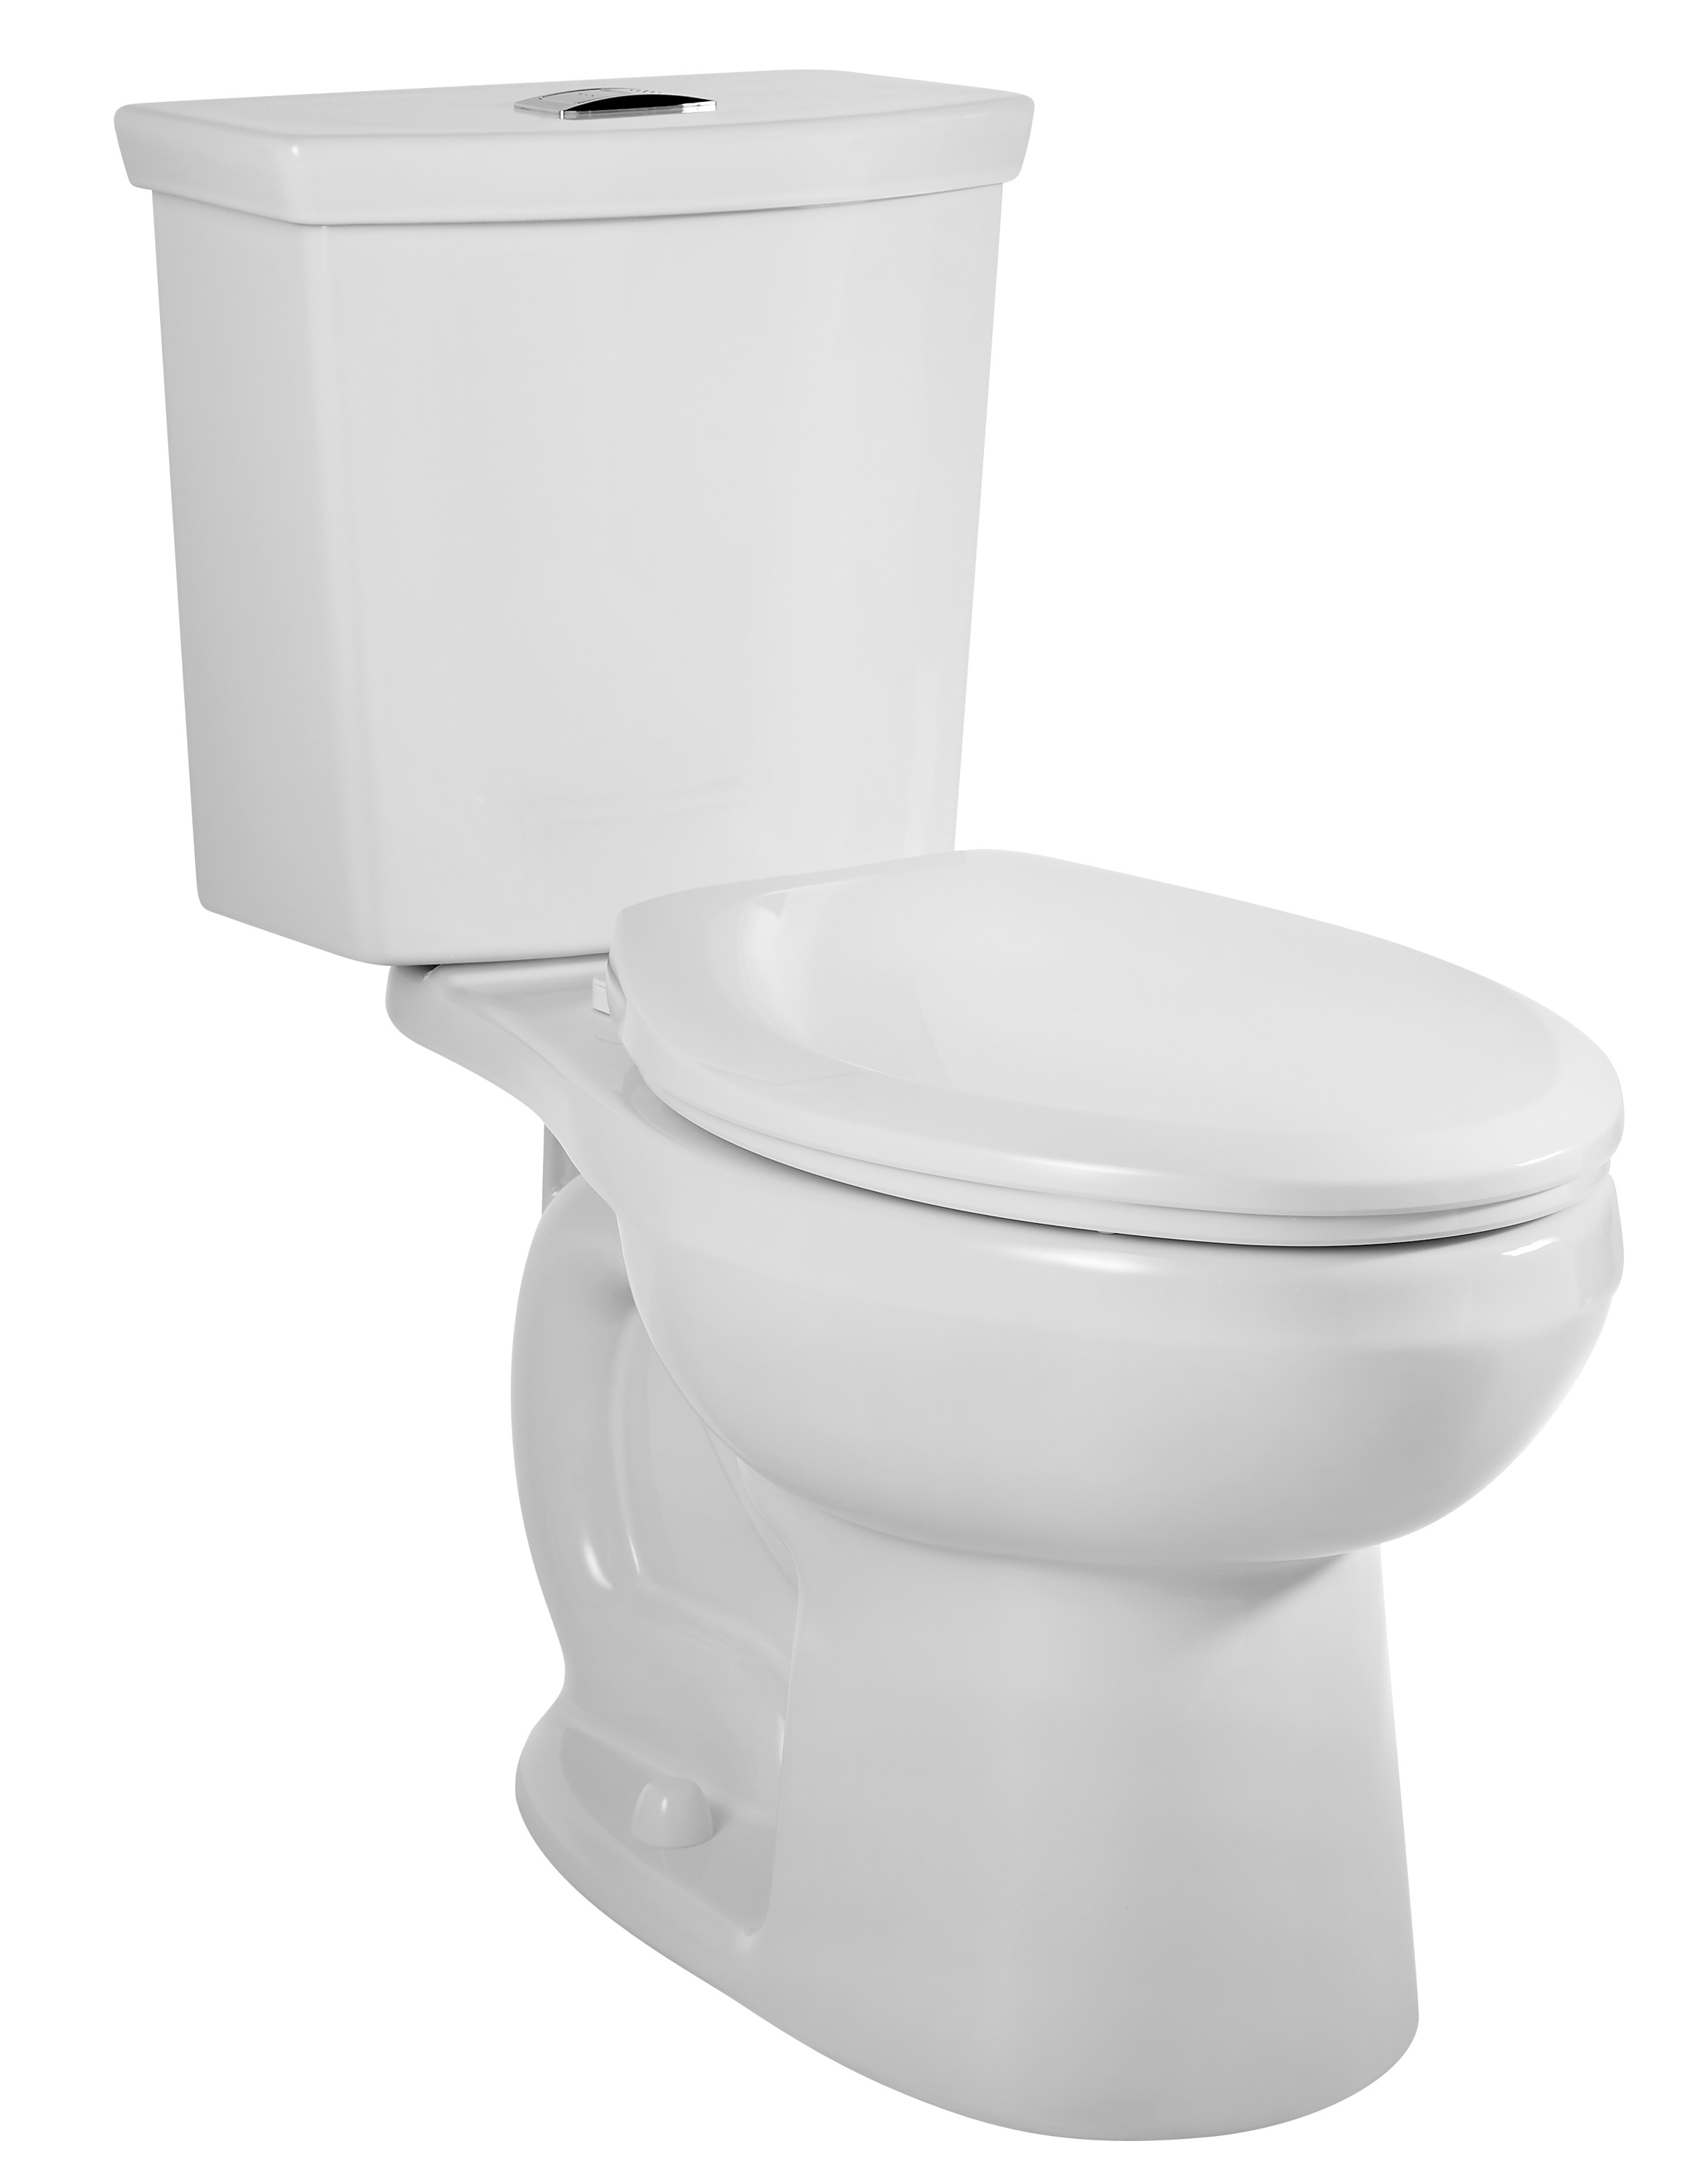 Cadet 3 Two-Piece Dual Flush 1.6 gpf/6.0 Lpf and 1.0 gpf/3.8 Lpf Chair Height Elongated Complete Toilet With Seat and Lined Tank